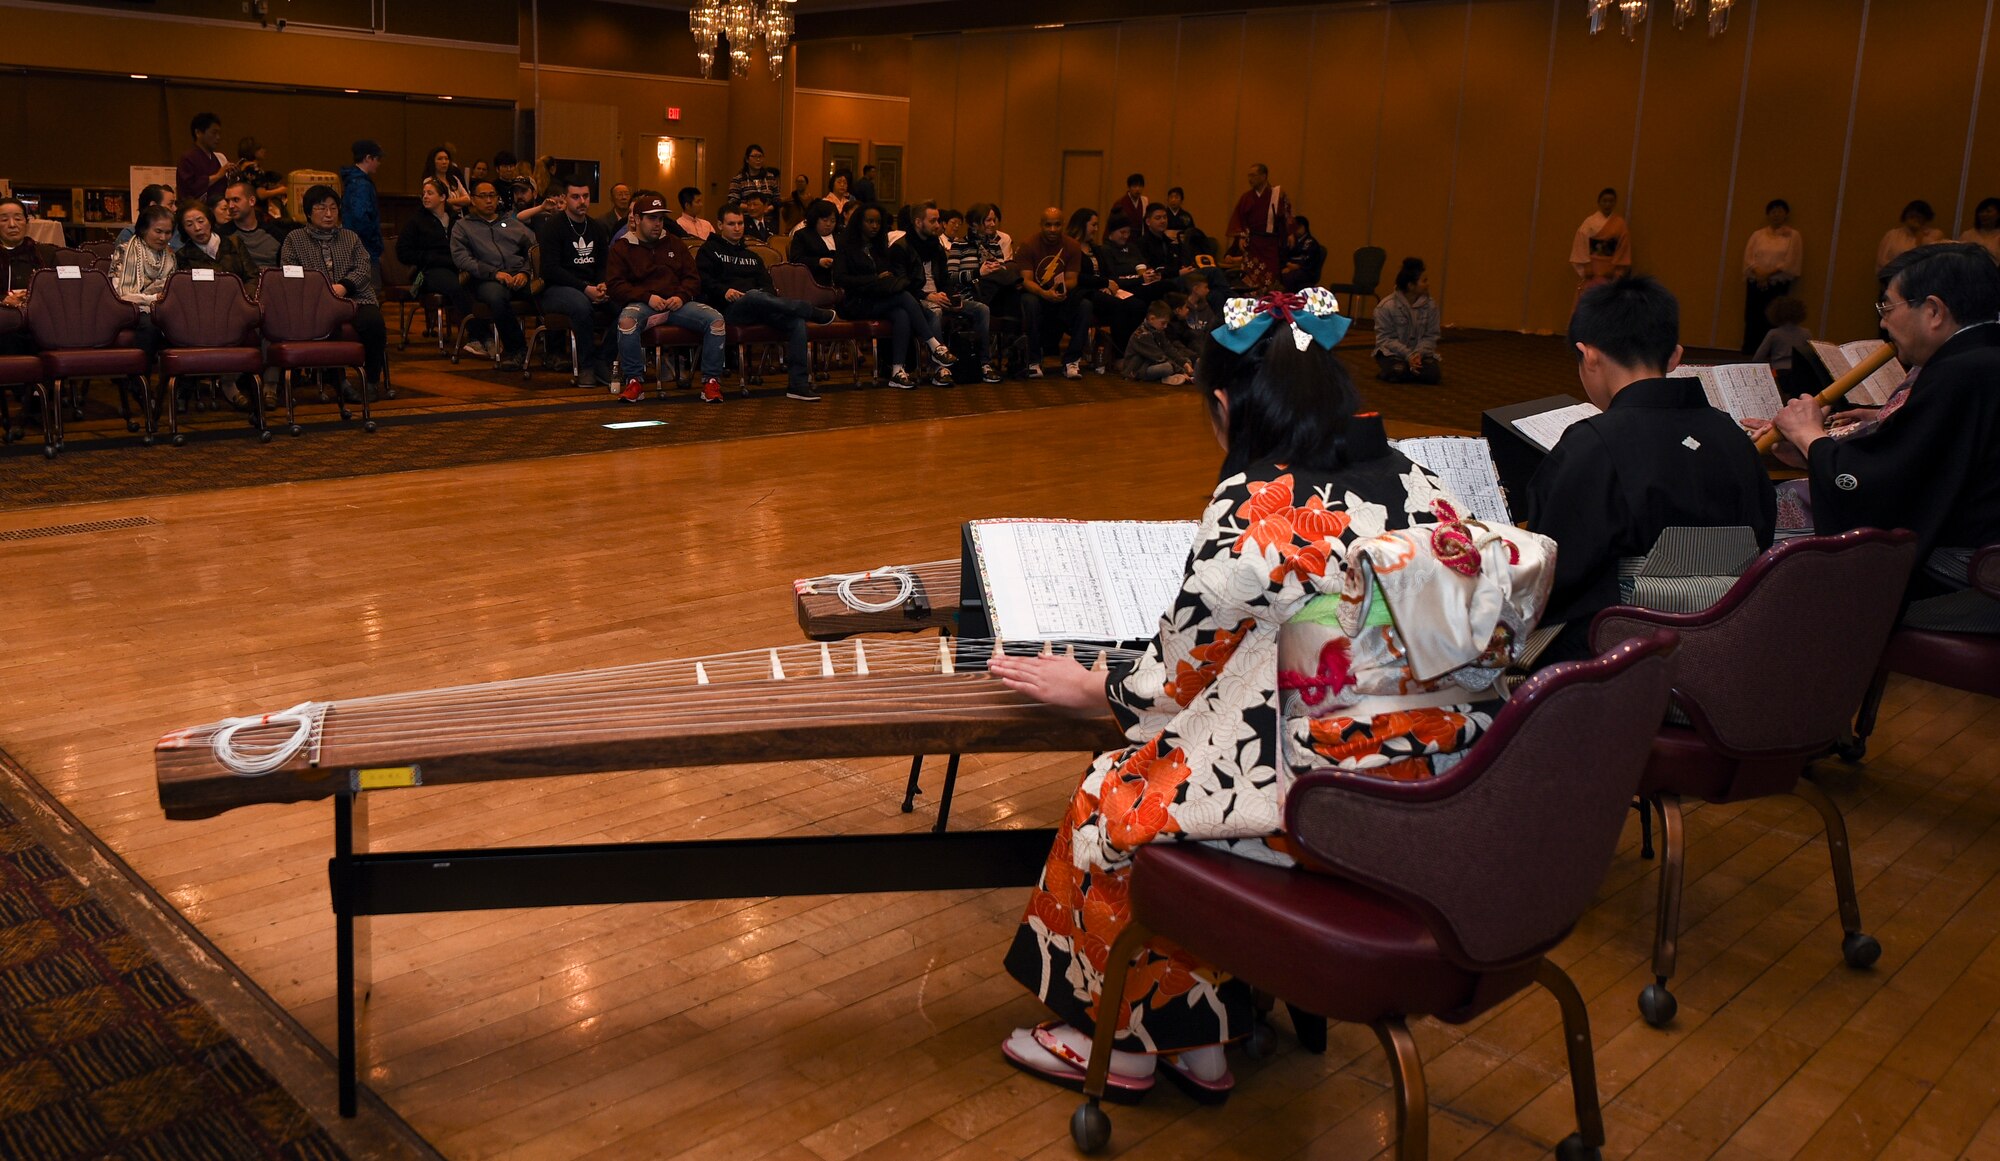 The Wa-wa-wa Club performs with koto strings during the 32nd Annual Japan Day at Misawa Air Base, Japan, April 6, 2019. The Wa-wa-wa Club plays a variety of classical Japanese music with symphonic Japanese instruments across the Aomori prefecture. (U.S. Air Force photo by Branden Yamada)